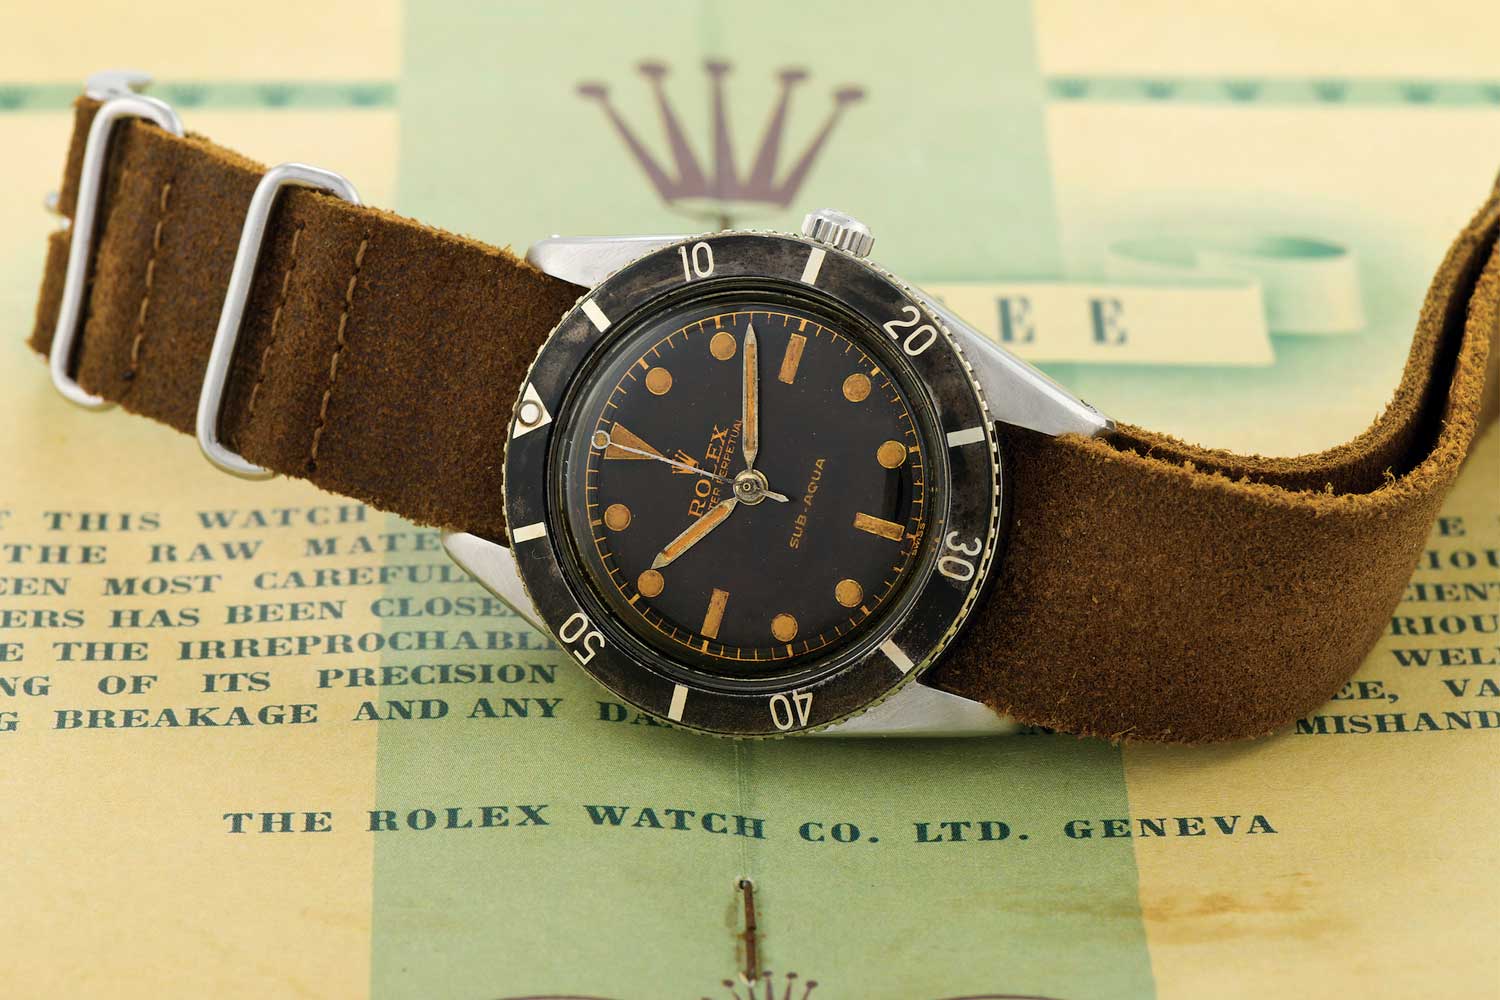 Rolex-Submariner reference 6204 was the very first dive watch to be rated to a depth of 100 metres. The watch had a highly legible dial layout, with hands that like the painted hour hands were filled with Radium. Image: Antiquorum